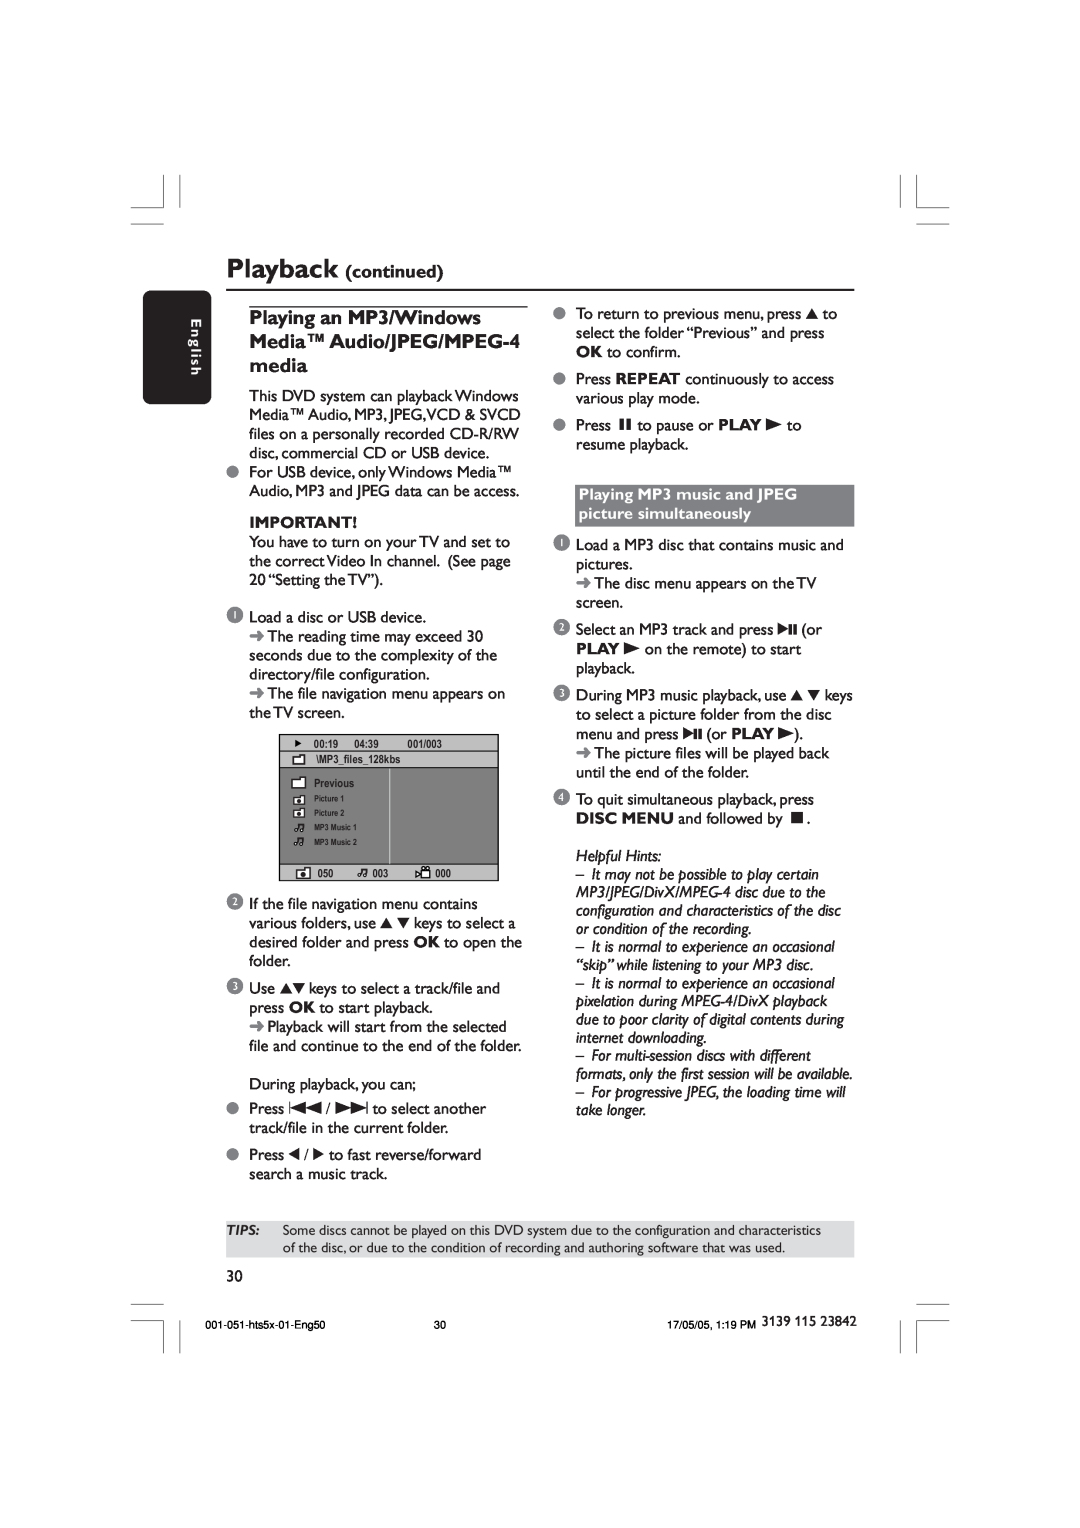 Philips HTS5000W user manual Playback continued, Playing MP3 music and JPEG picture simultaneously, Helpful Hints 